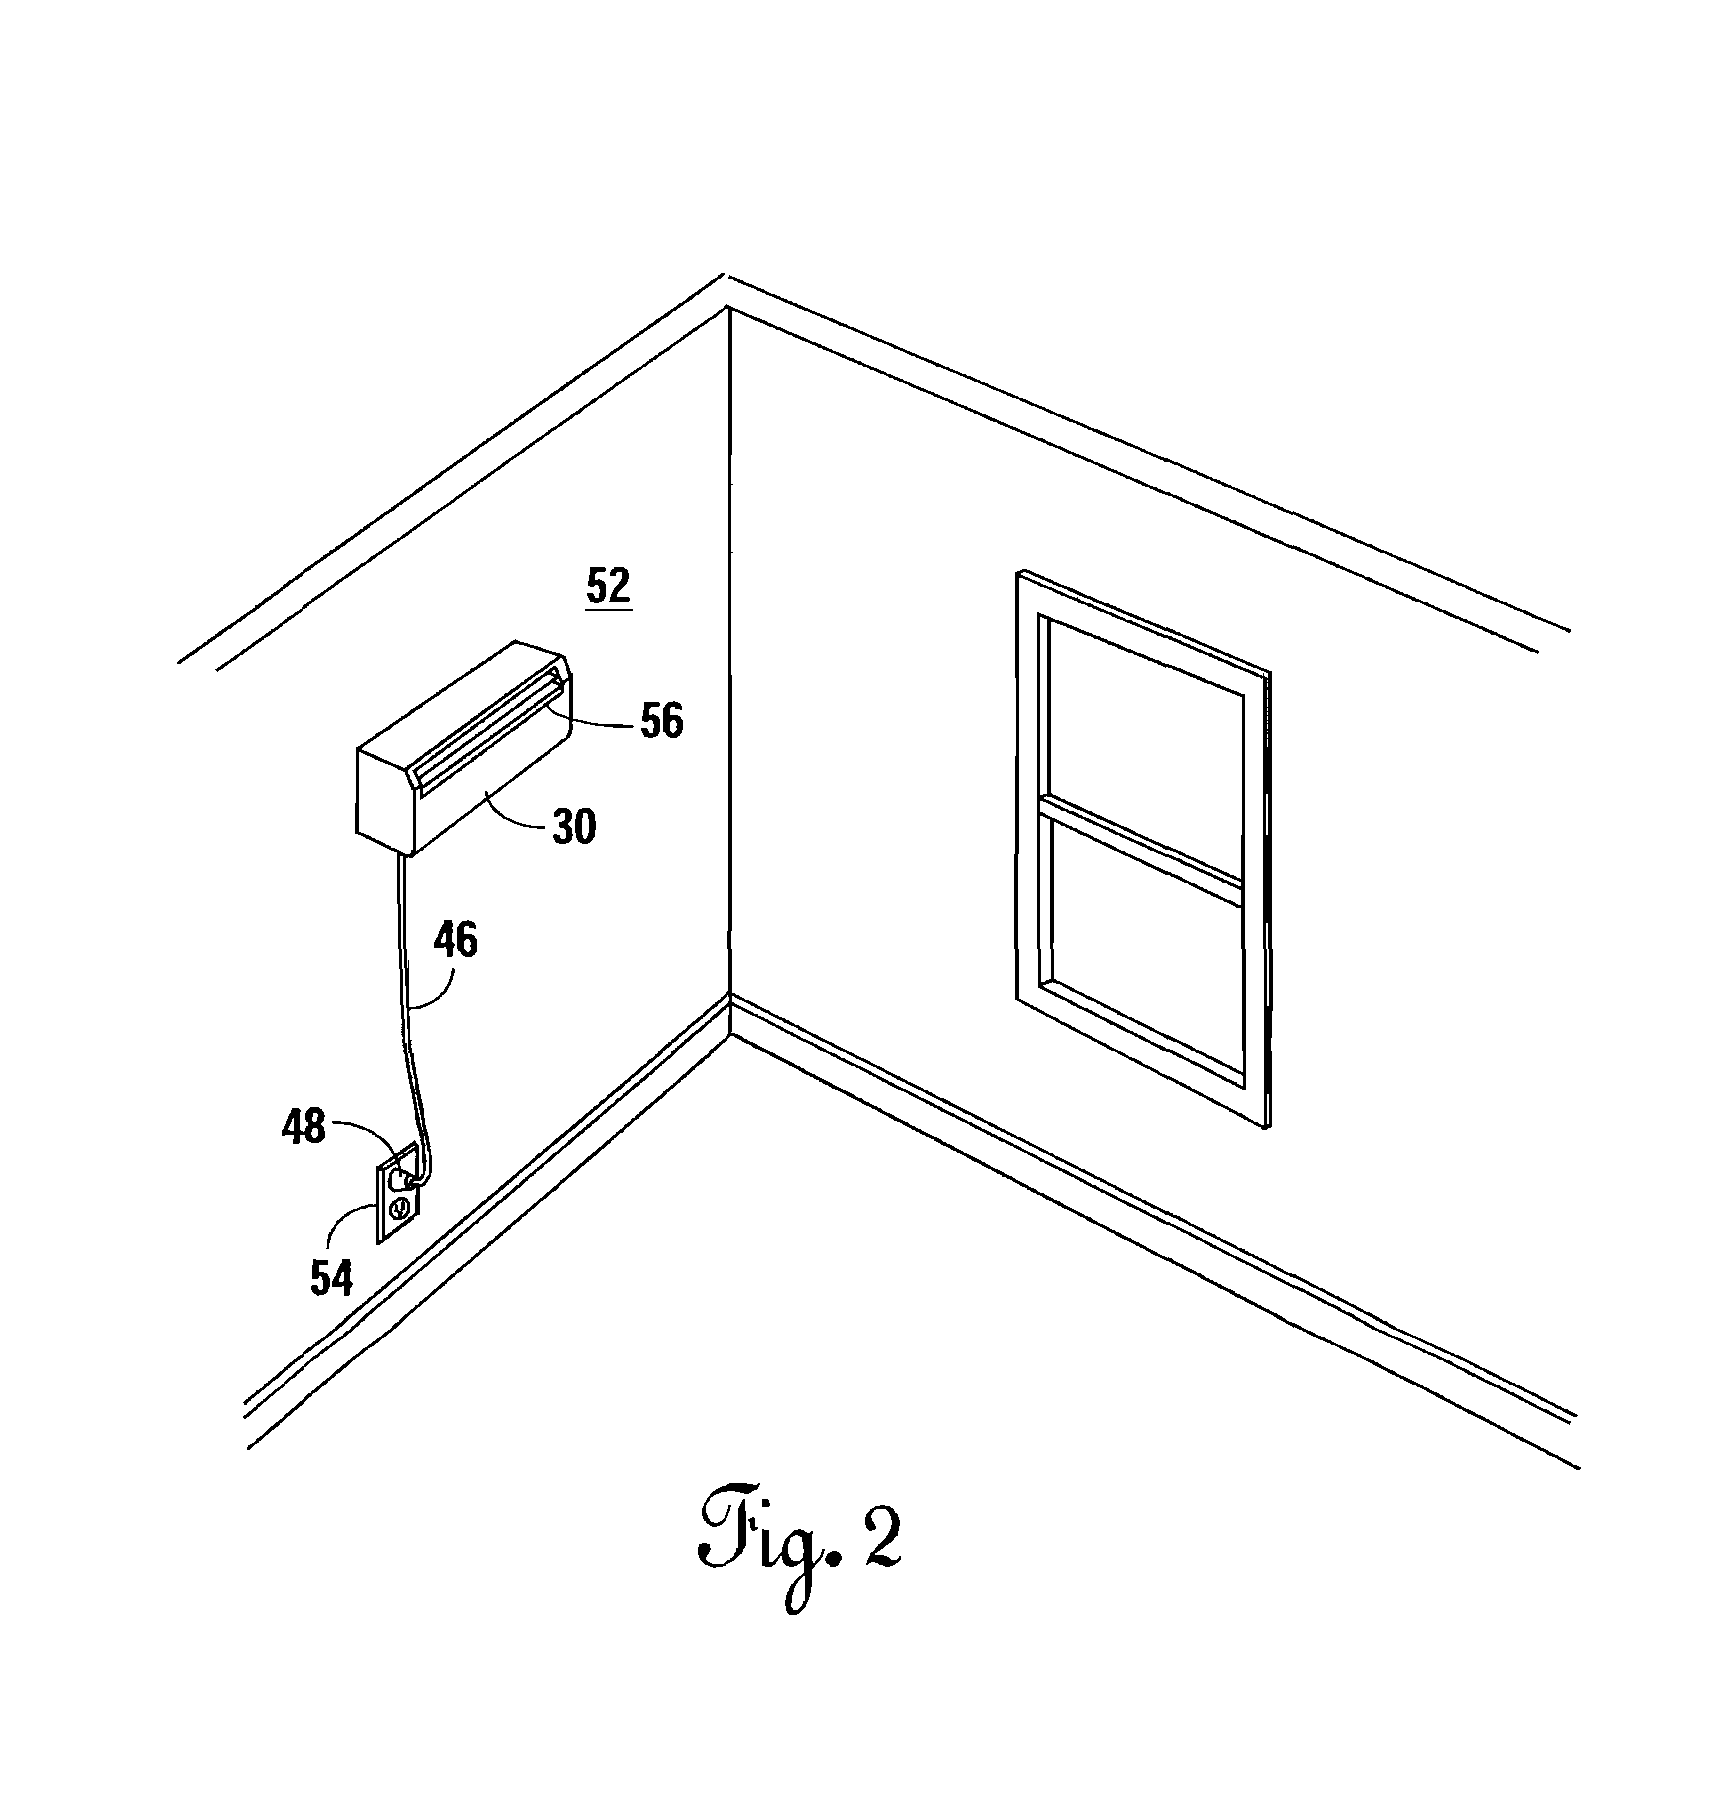 Apparatus and method for installation by unlicensed personnel of a pre-charged, ductless heating/cooling system